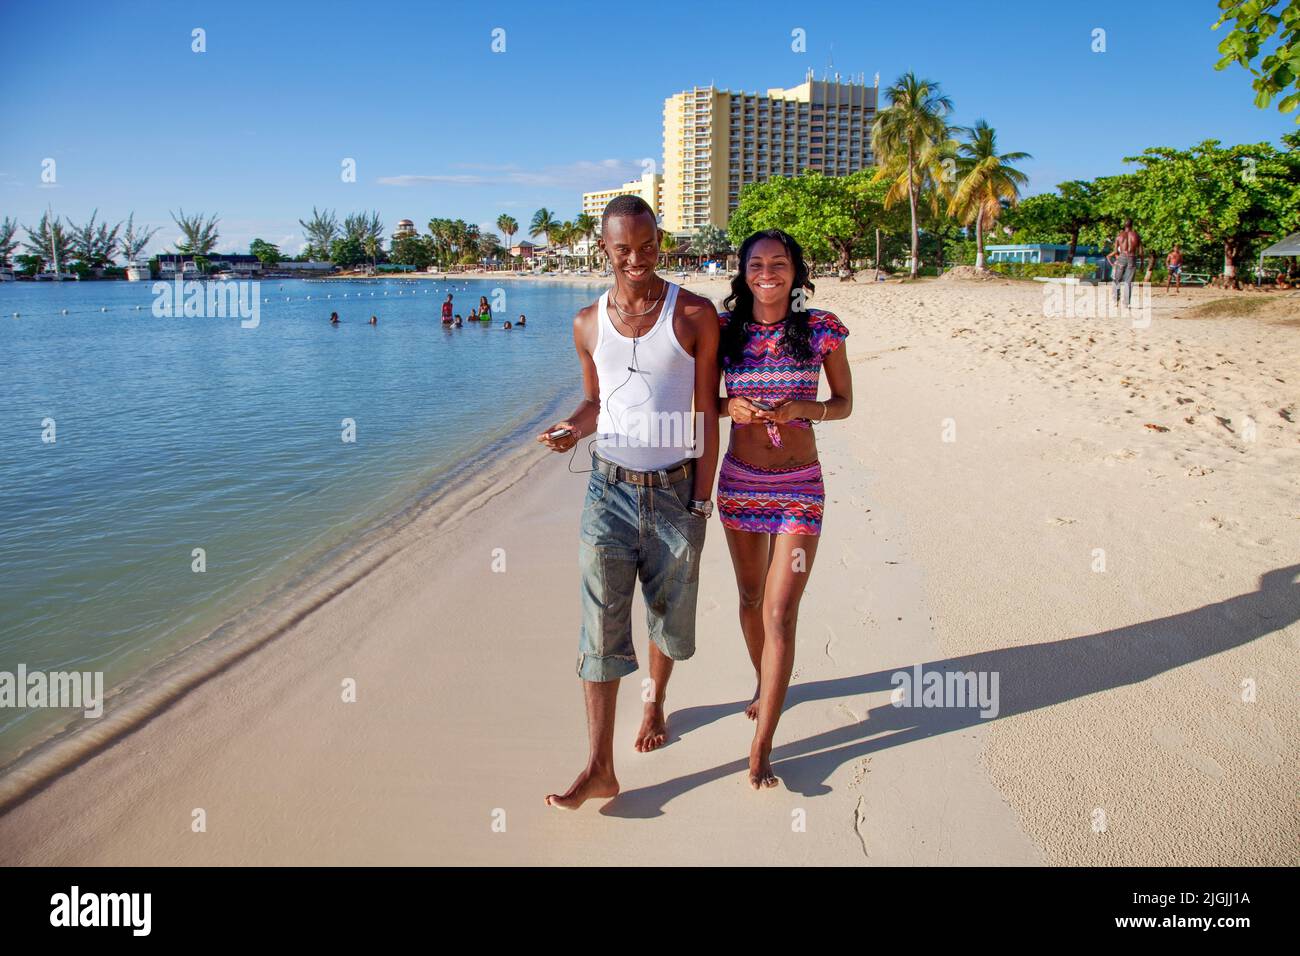 Jamaica, one of the beaches in the northern town Ocho Rios. Stock Photo